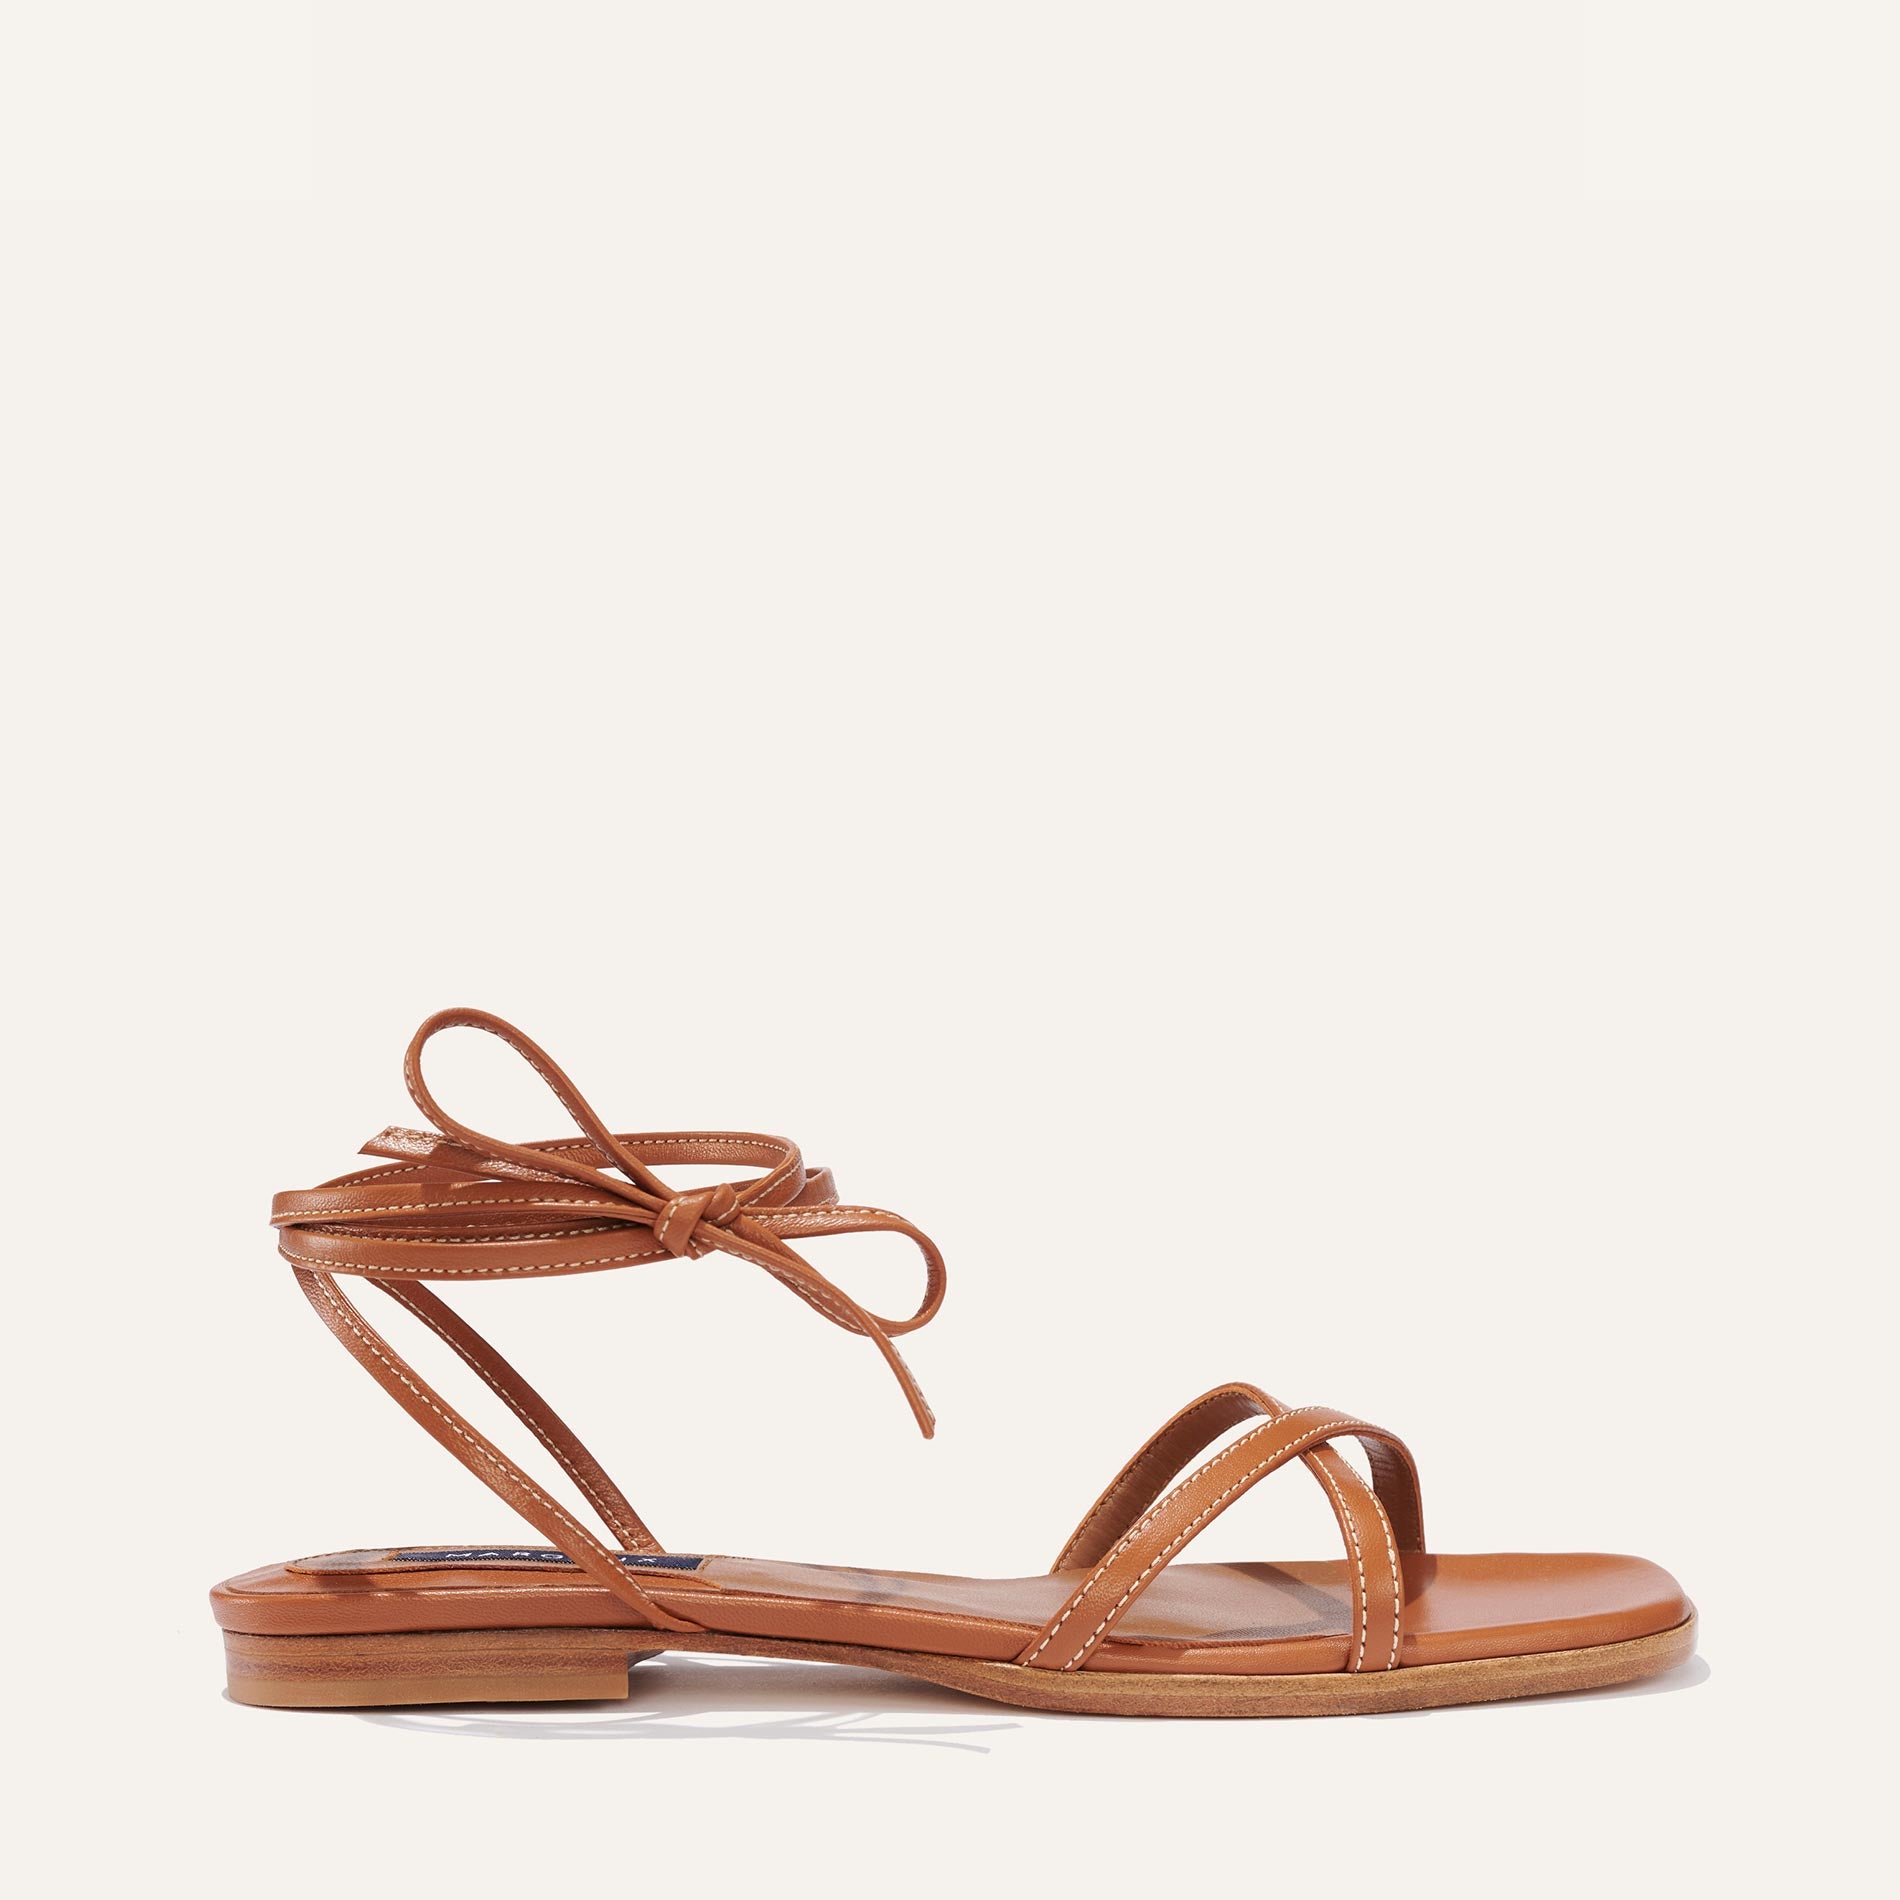 Margaux's classic strappy Wrap Sandal with ankle ties, made in Spain from soft, saddle brown Italian nappa leather